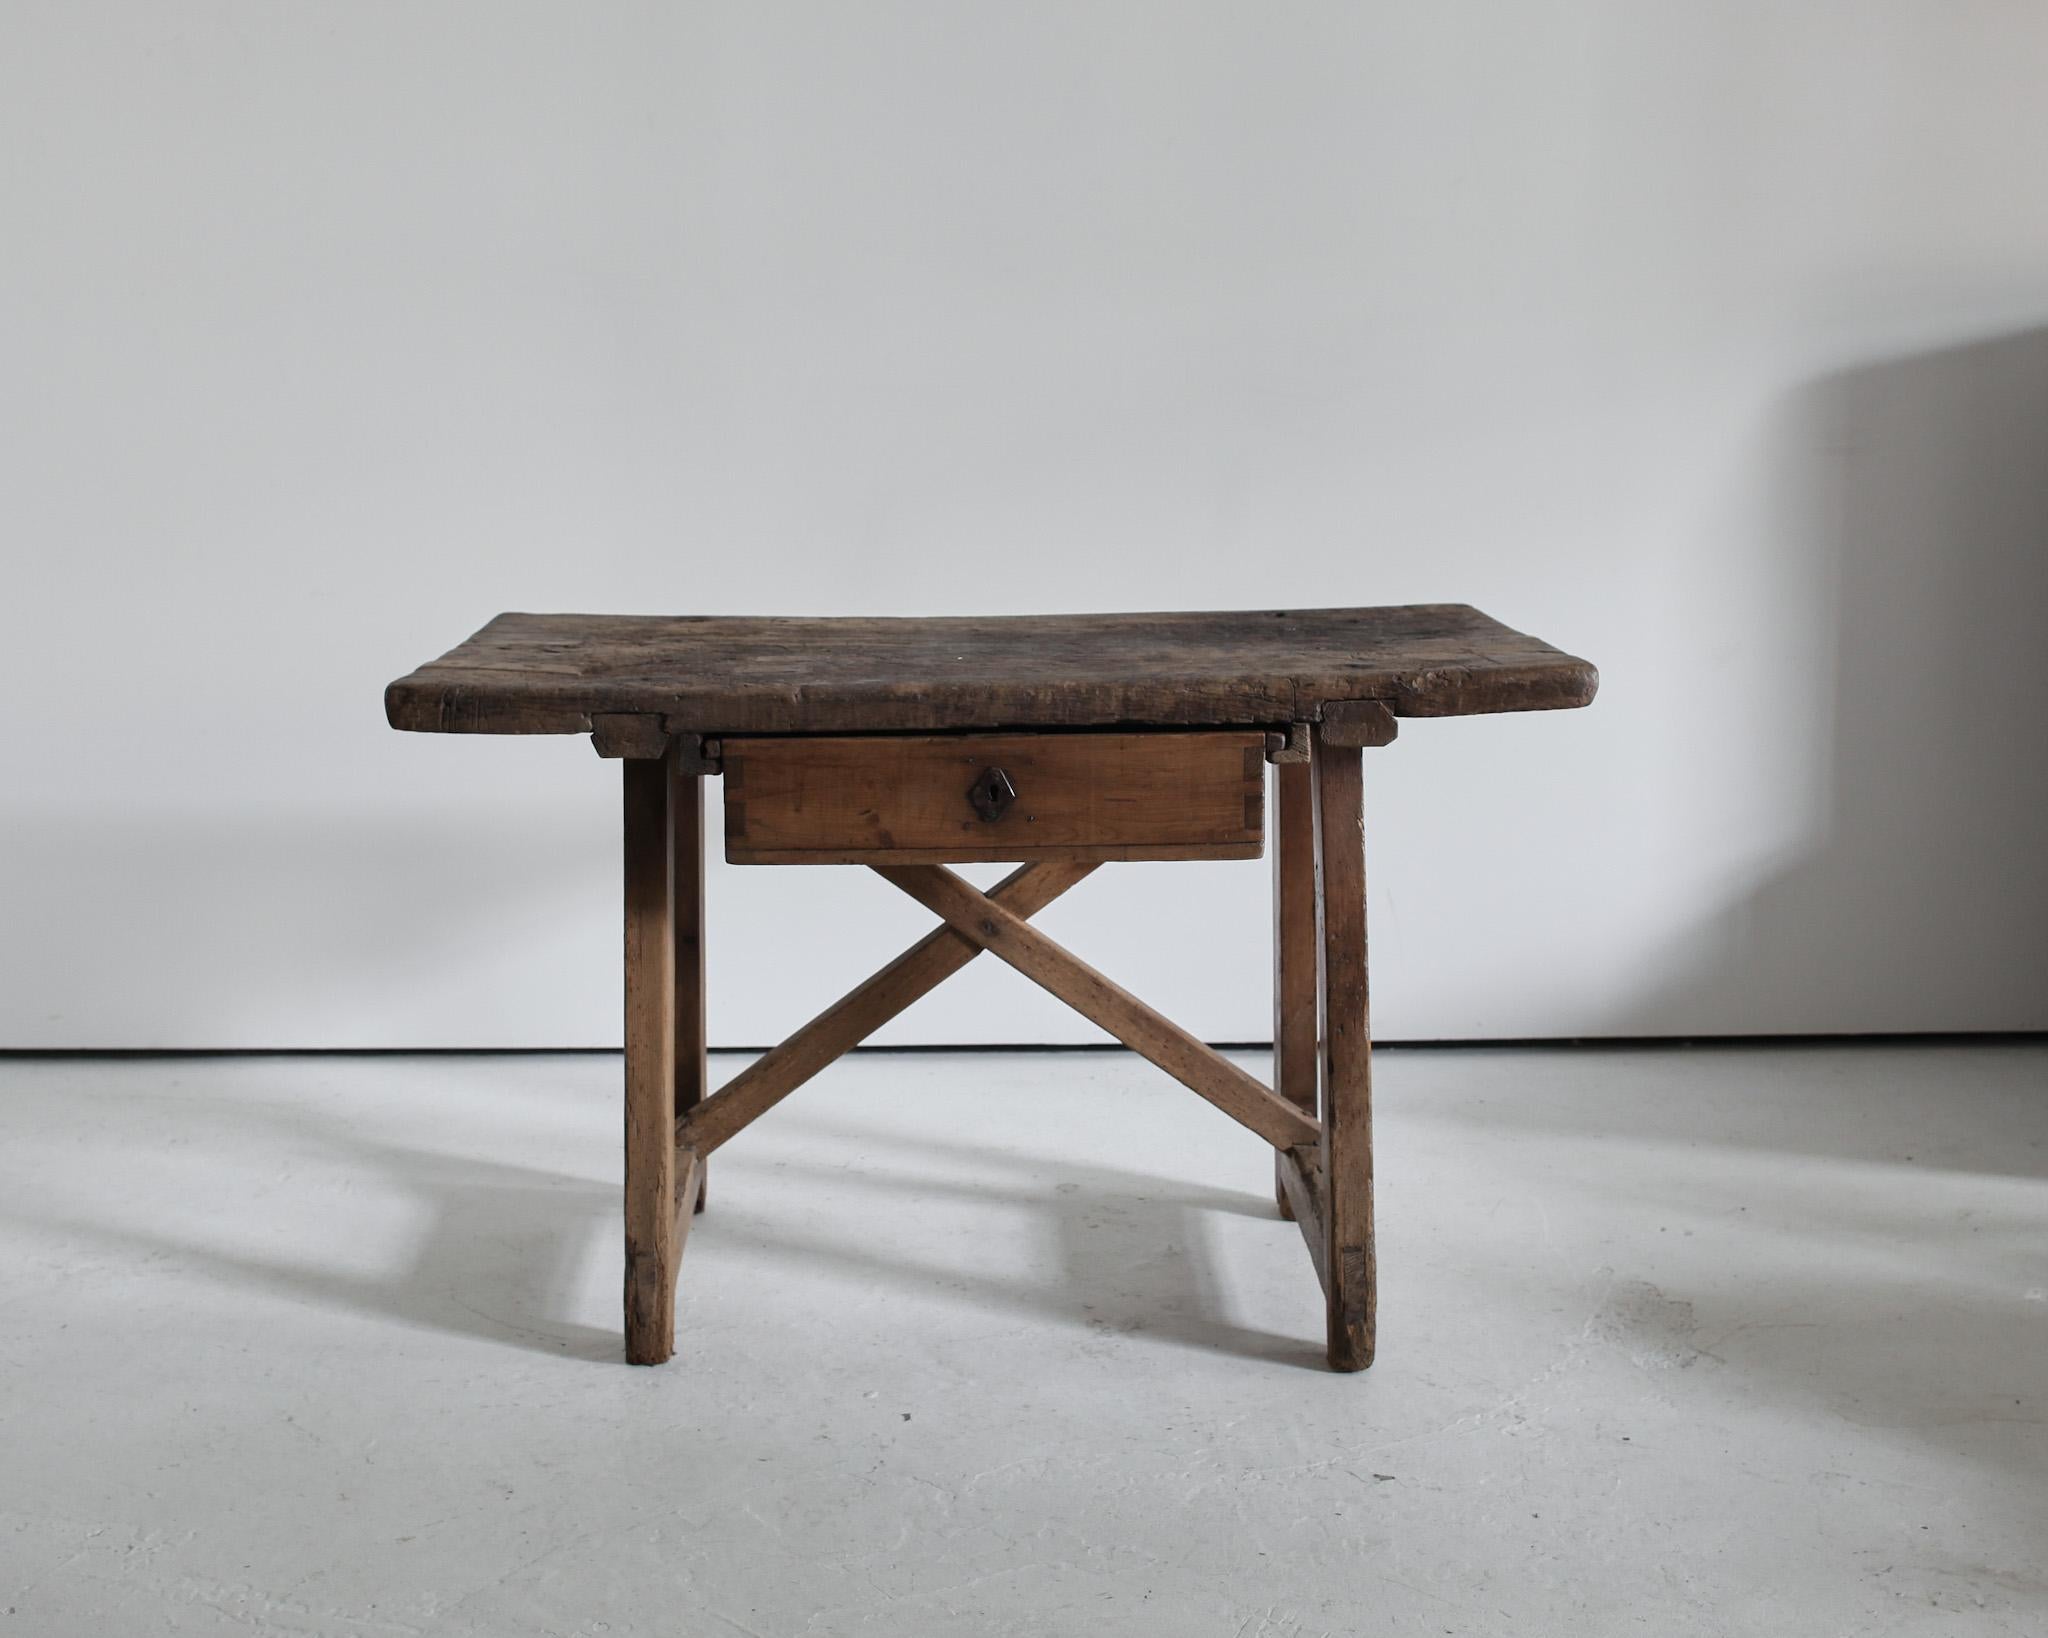 An early 19th century Catalan work/side table from the Pyrenees.

Thick, heavily worn single slab oak top on “X” frame pine base.

Single pine drawer.